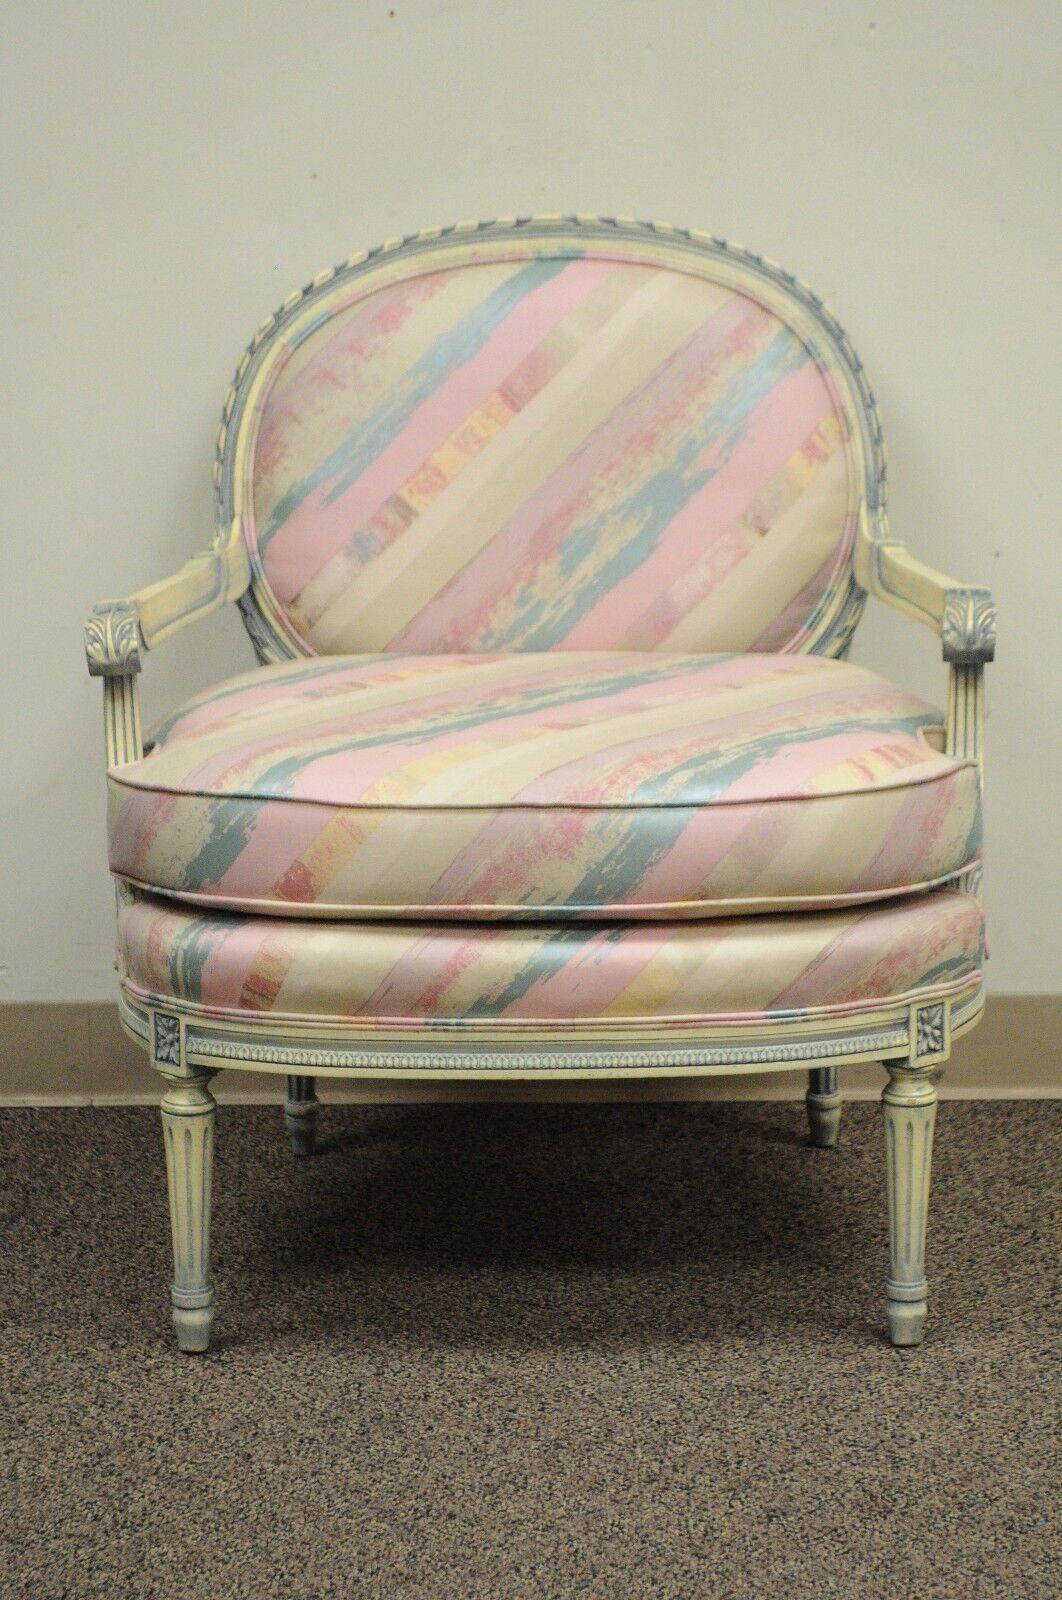 Vintage French Louis XVI Style Boudoir Armchair. Item features a solid Carved Wood Frame, Column Legs, Blue and Cream Finish to the Wood which matches the Blue and Pink Upholstery, Classic French Louis XVI Form. Circa Mid 20th Century, USA.